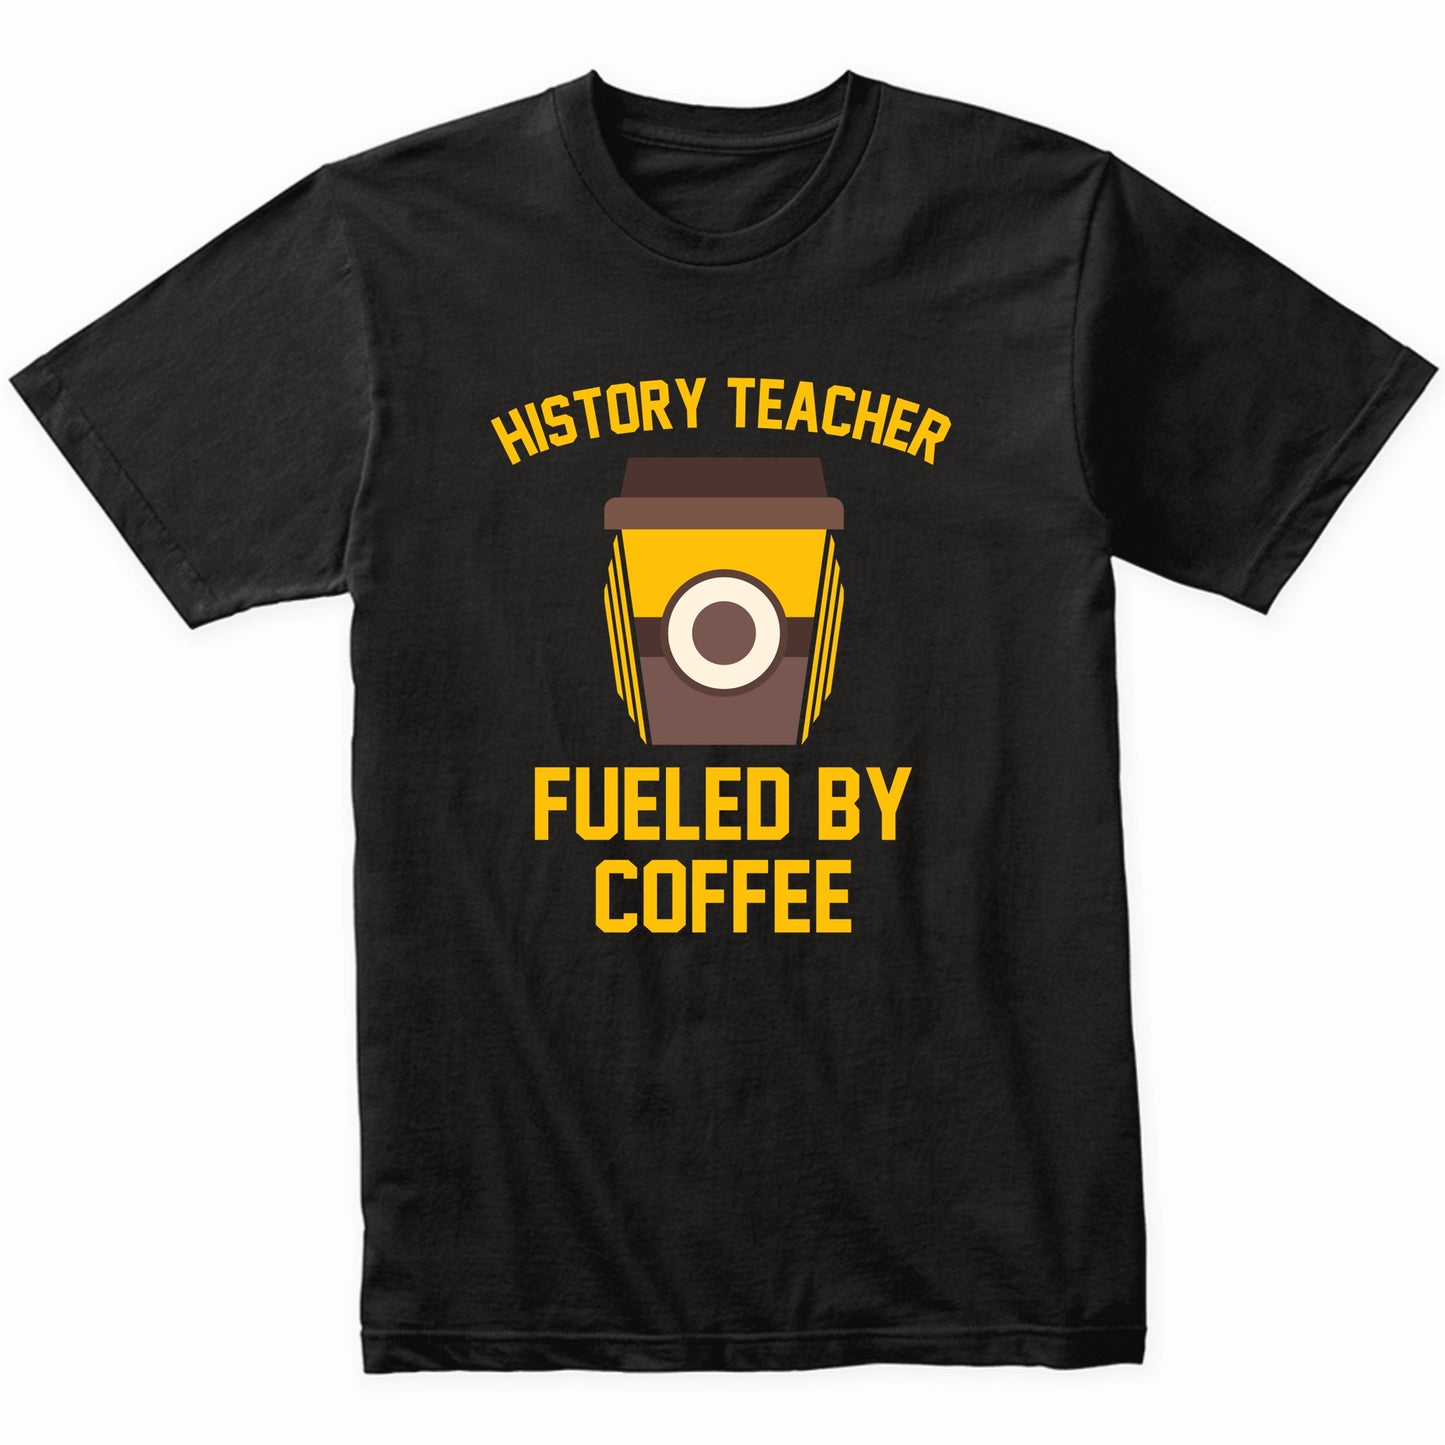 History Teacher Fueled By Coffee Funny Teaching Shirt